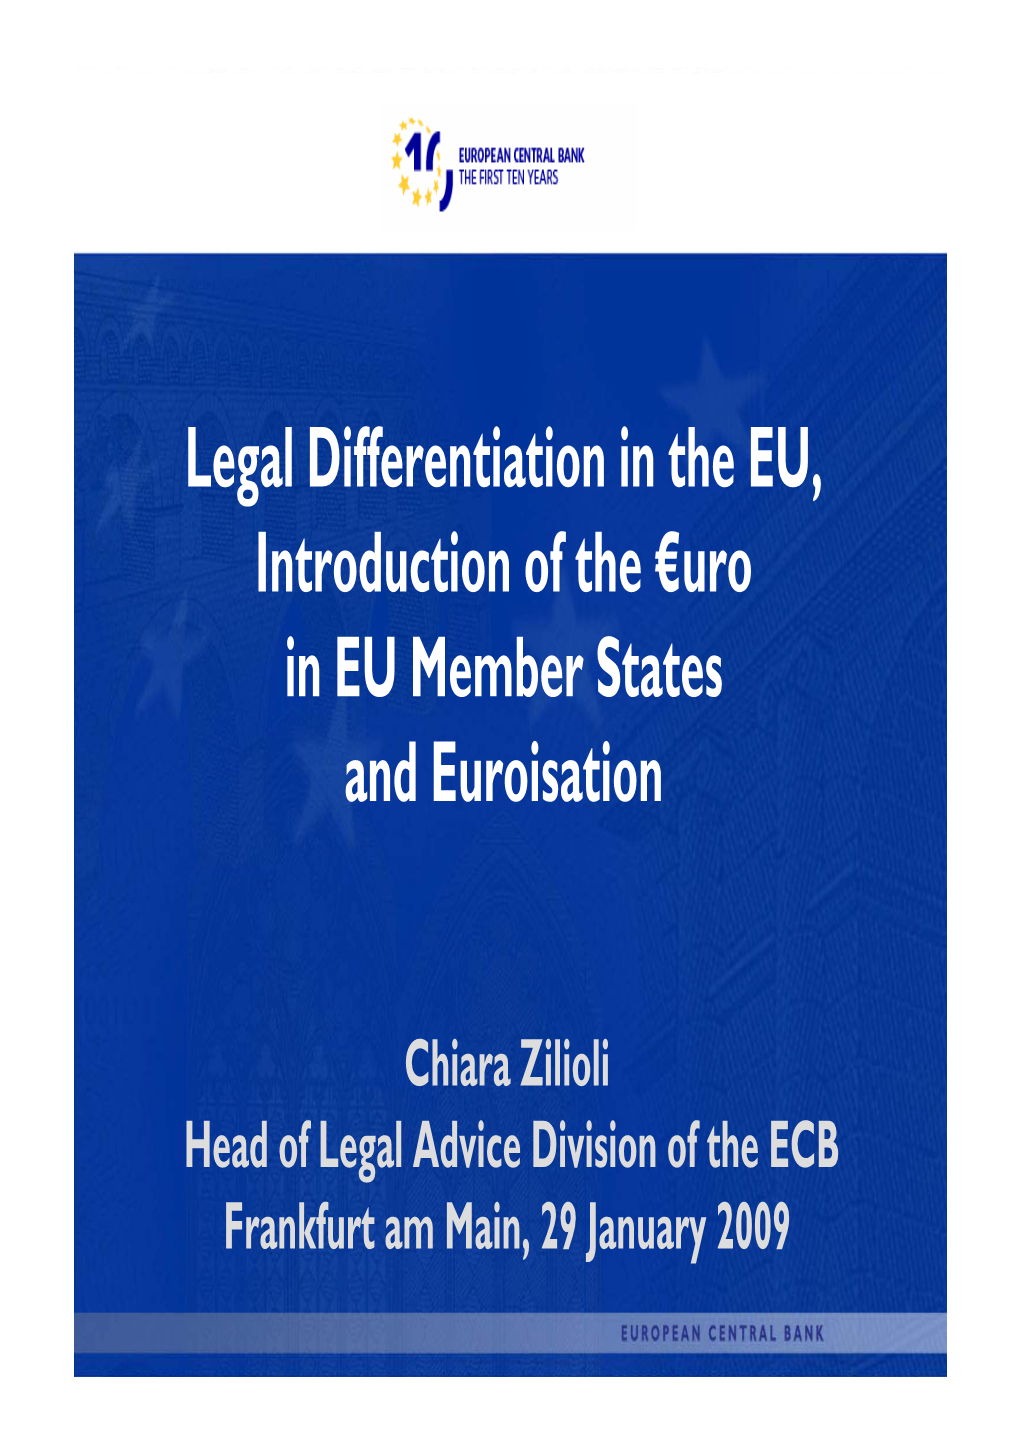 Legal Differentiation in the EU, Introduction of the €Uro in EU Member States and Euroisation